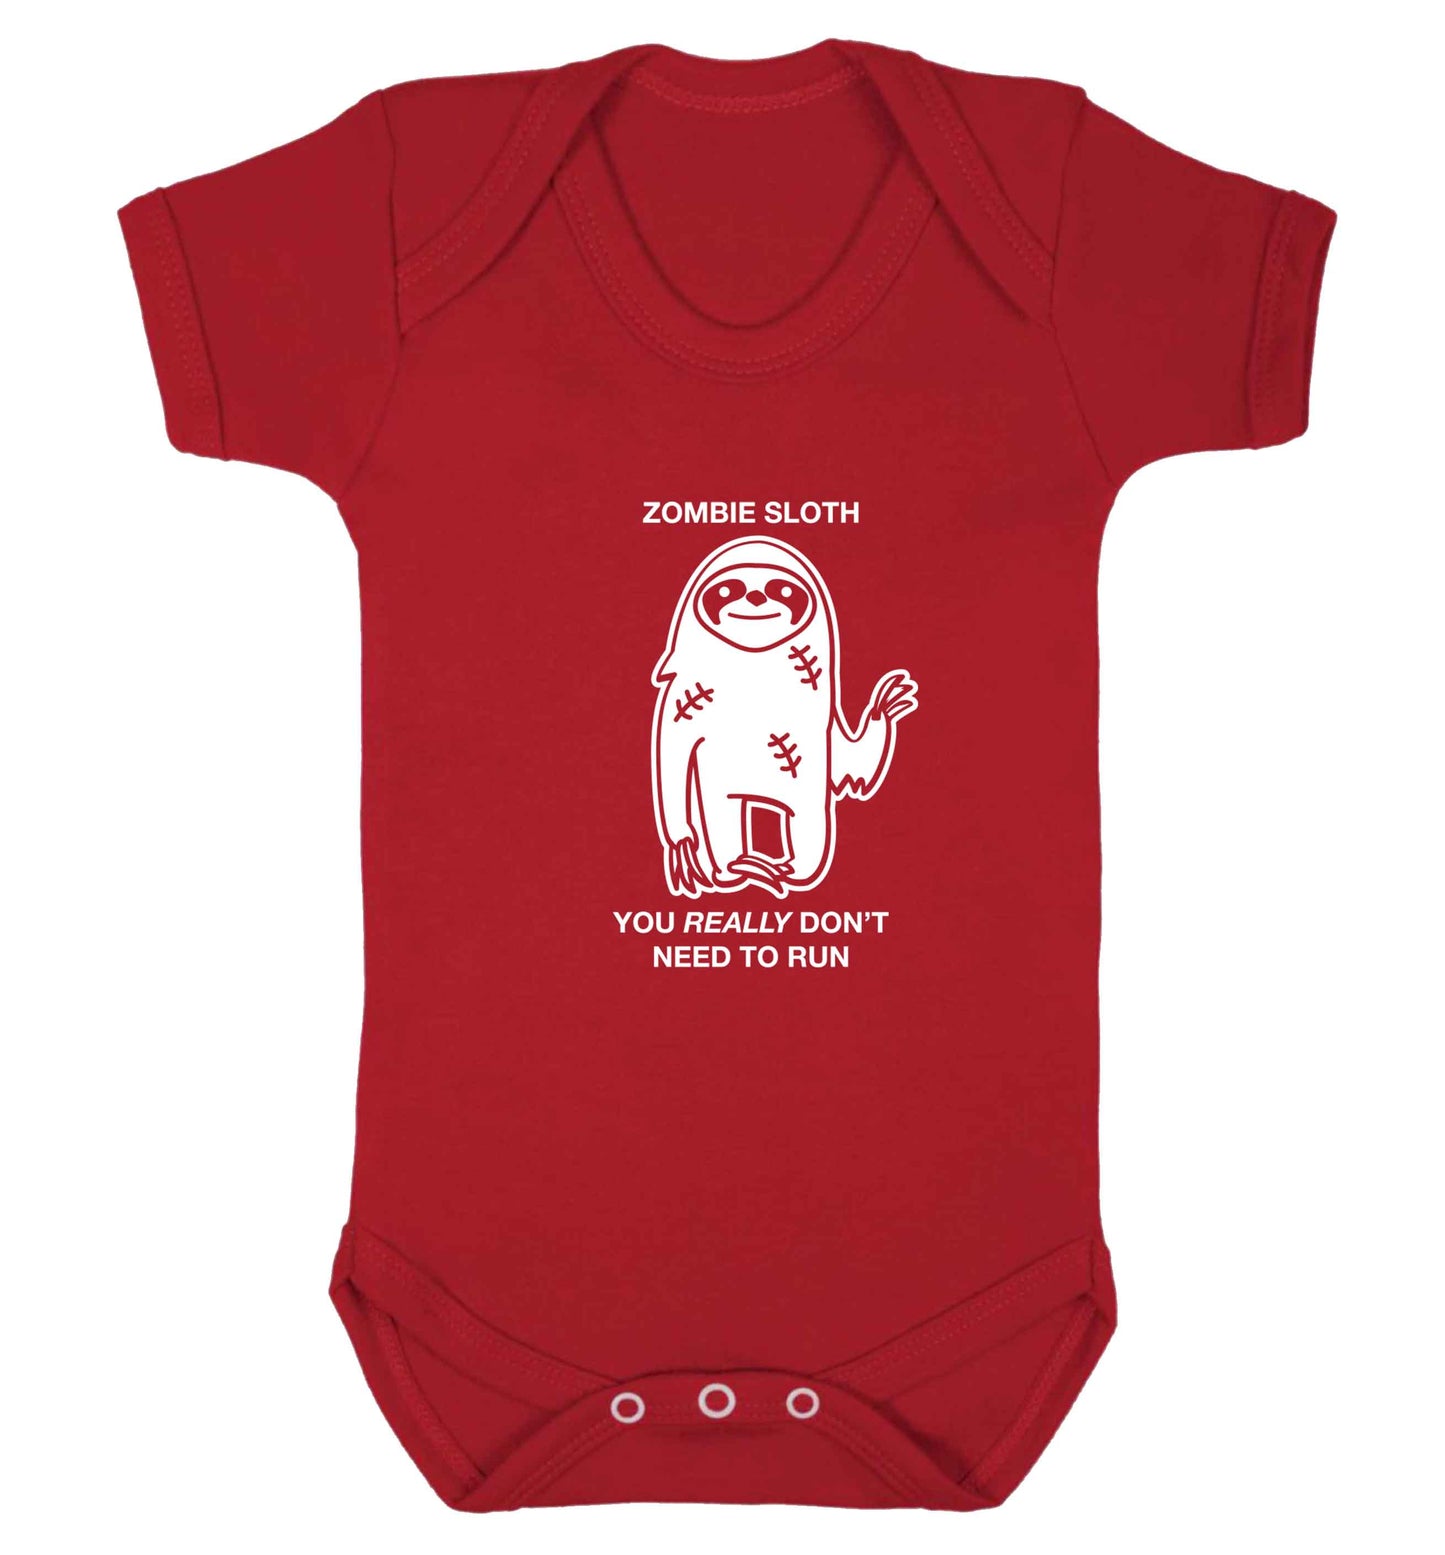 Zombie sloth you really don't need to run baby vest red 18-24 months